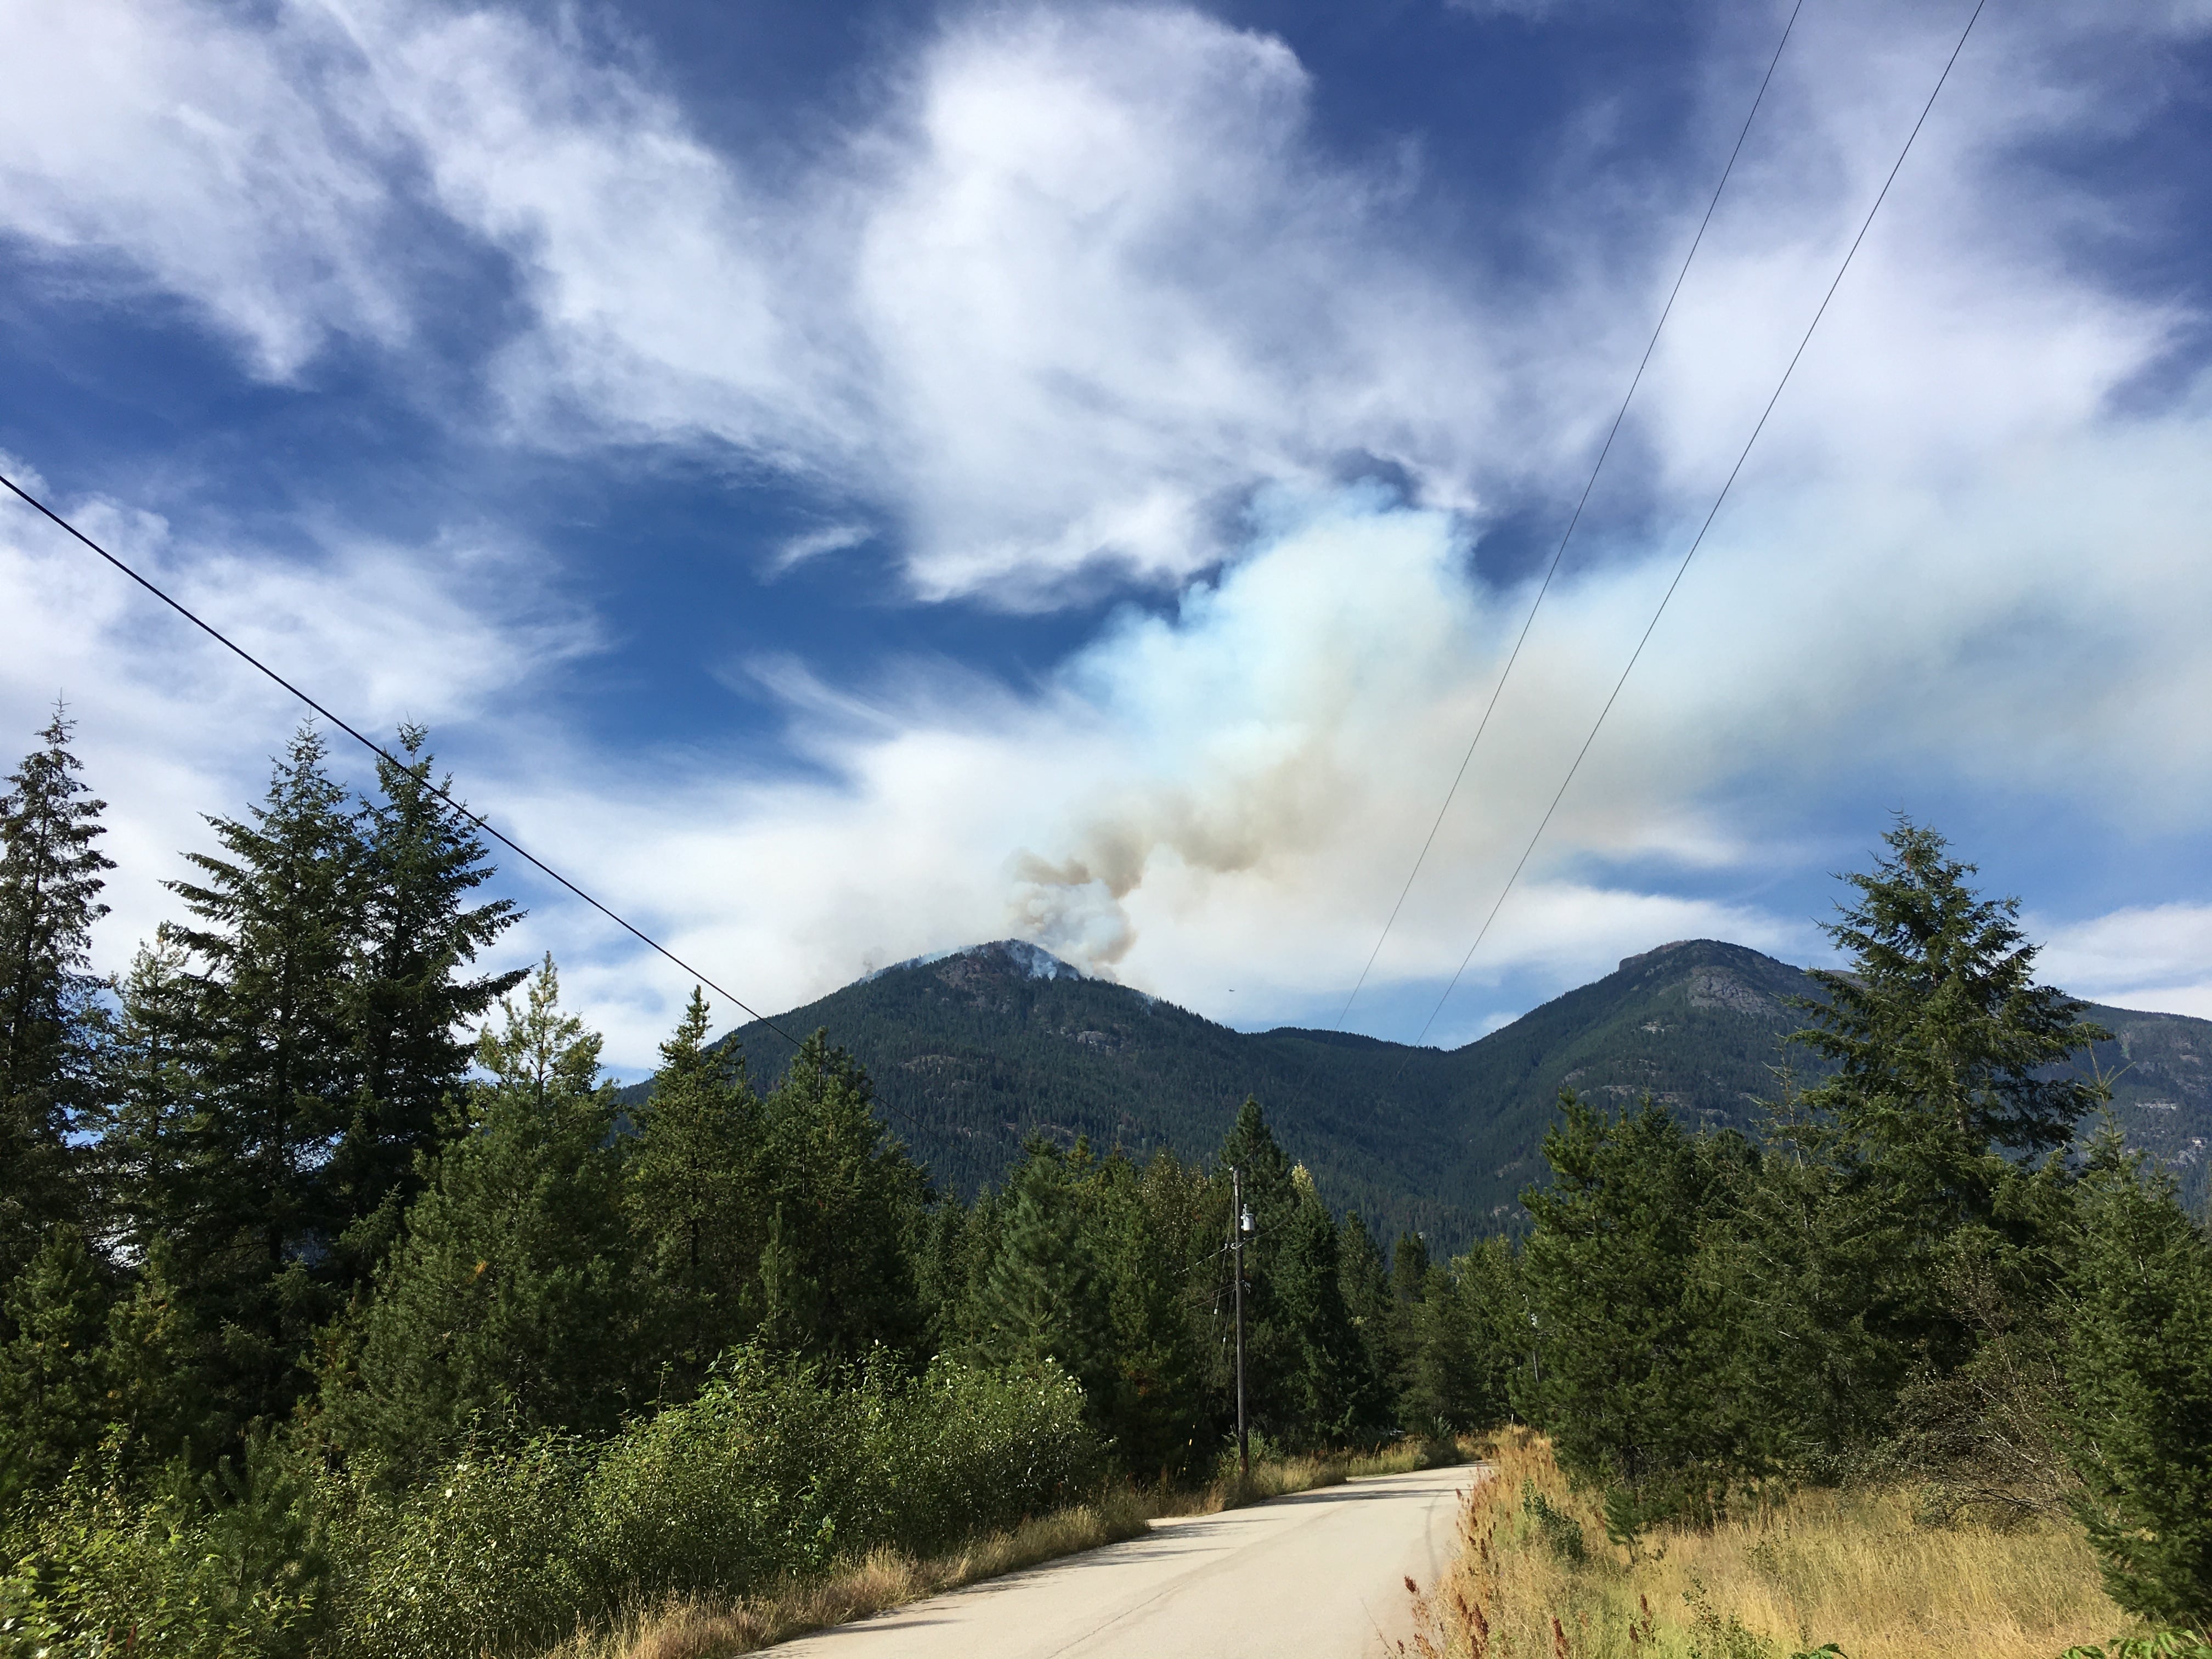 Talbott Creek fire in the Slocan Valley now estimated at 446 hectares